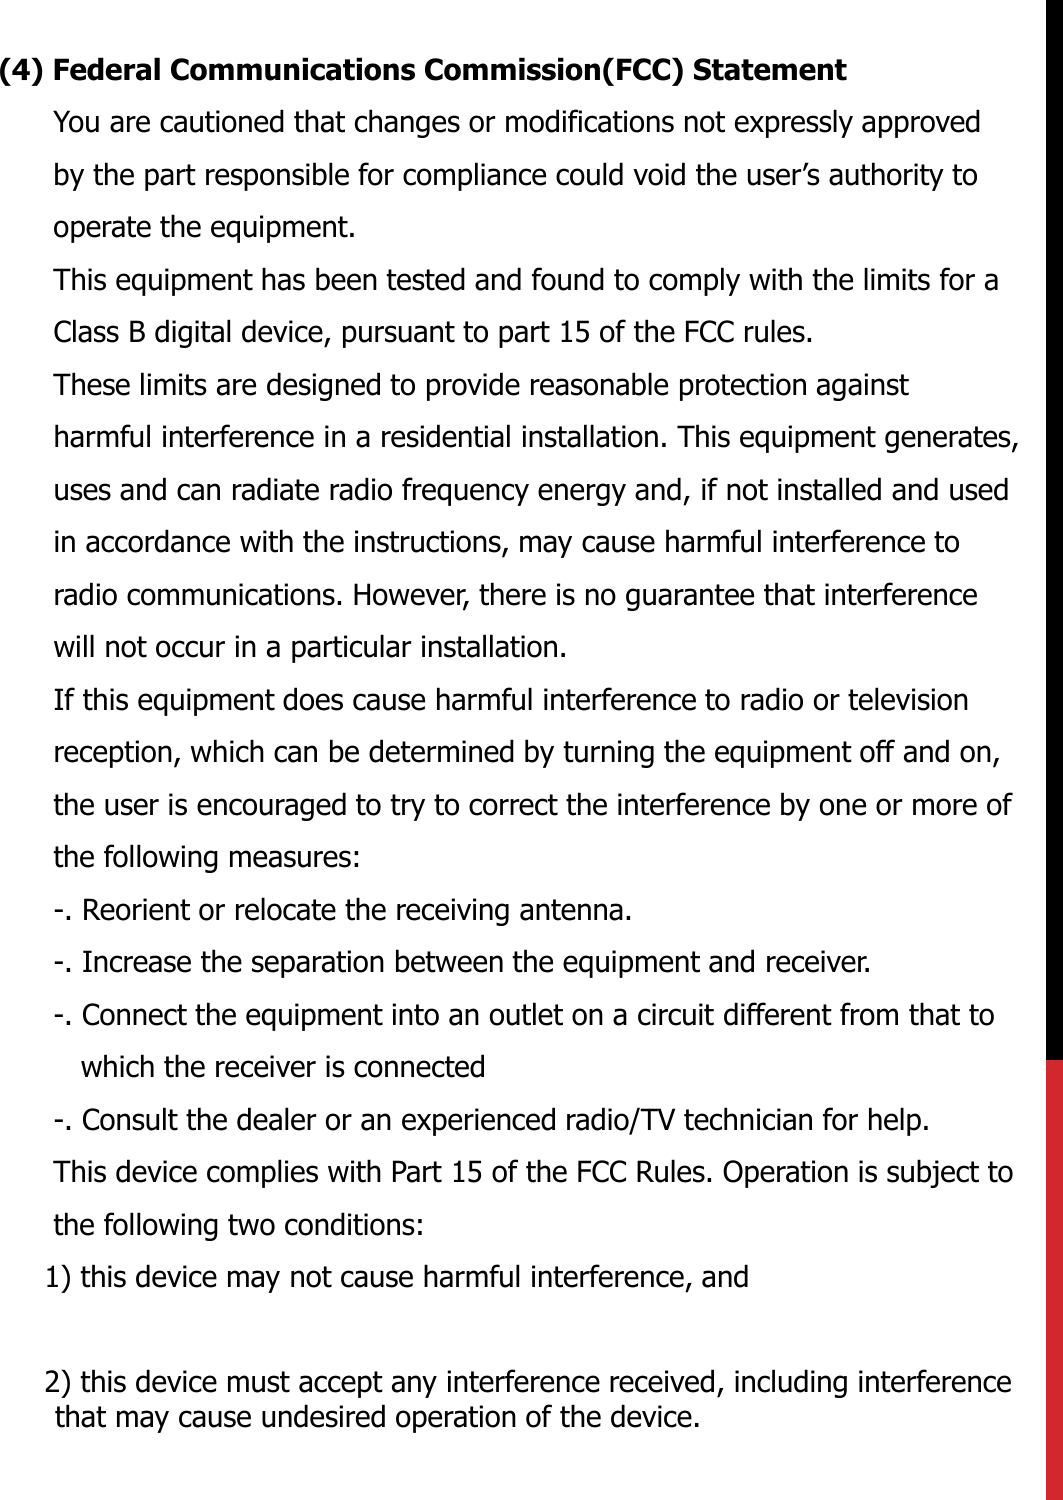 (4) Federal Communications Commission(FCC) StatementYou are cautioned that changes or modifications not expressly approved by the part responsible for compliance could void the user’s authority to operate the equipment.This equipment has been tested and found to comply with the limits for a Class B digital device, pursuant to part 15 of the FCC rules.These limits are designed to provide reasonable protection against harmful interference in a residential installation. This equipment generates, uses and can radiate radio frequency energy and, if not installed and used in accordance with the instructions, may cause harmful interference to radio communications. However, there is no guarantee that interference will not occur in a particular installation.If this equipment does cause harmful interference to radio or television reception, which can be determined by turning the equipment off and on, the user is encouraged to try to correct the interference by one or more of the following measures:-. Reorient or relocate the receiving antenna.-. Increase the separation between the equipment and receiver.-. Connect the equipment into an outlet on a circuit different from that to which the receiver is connected-. Consult the dealer or an experienced radio/TV technician for help.This device complies with Part 15 of the FCC Rules. Operation is subject to the following two conditions:1) this device may not cause harmful interference, and2) this device must accept any interference received, including interference that may cause undesired operation of the device.